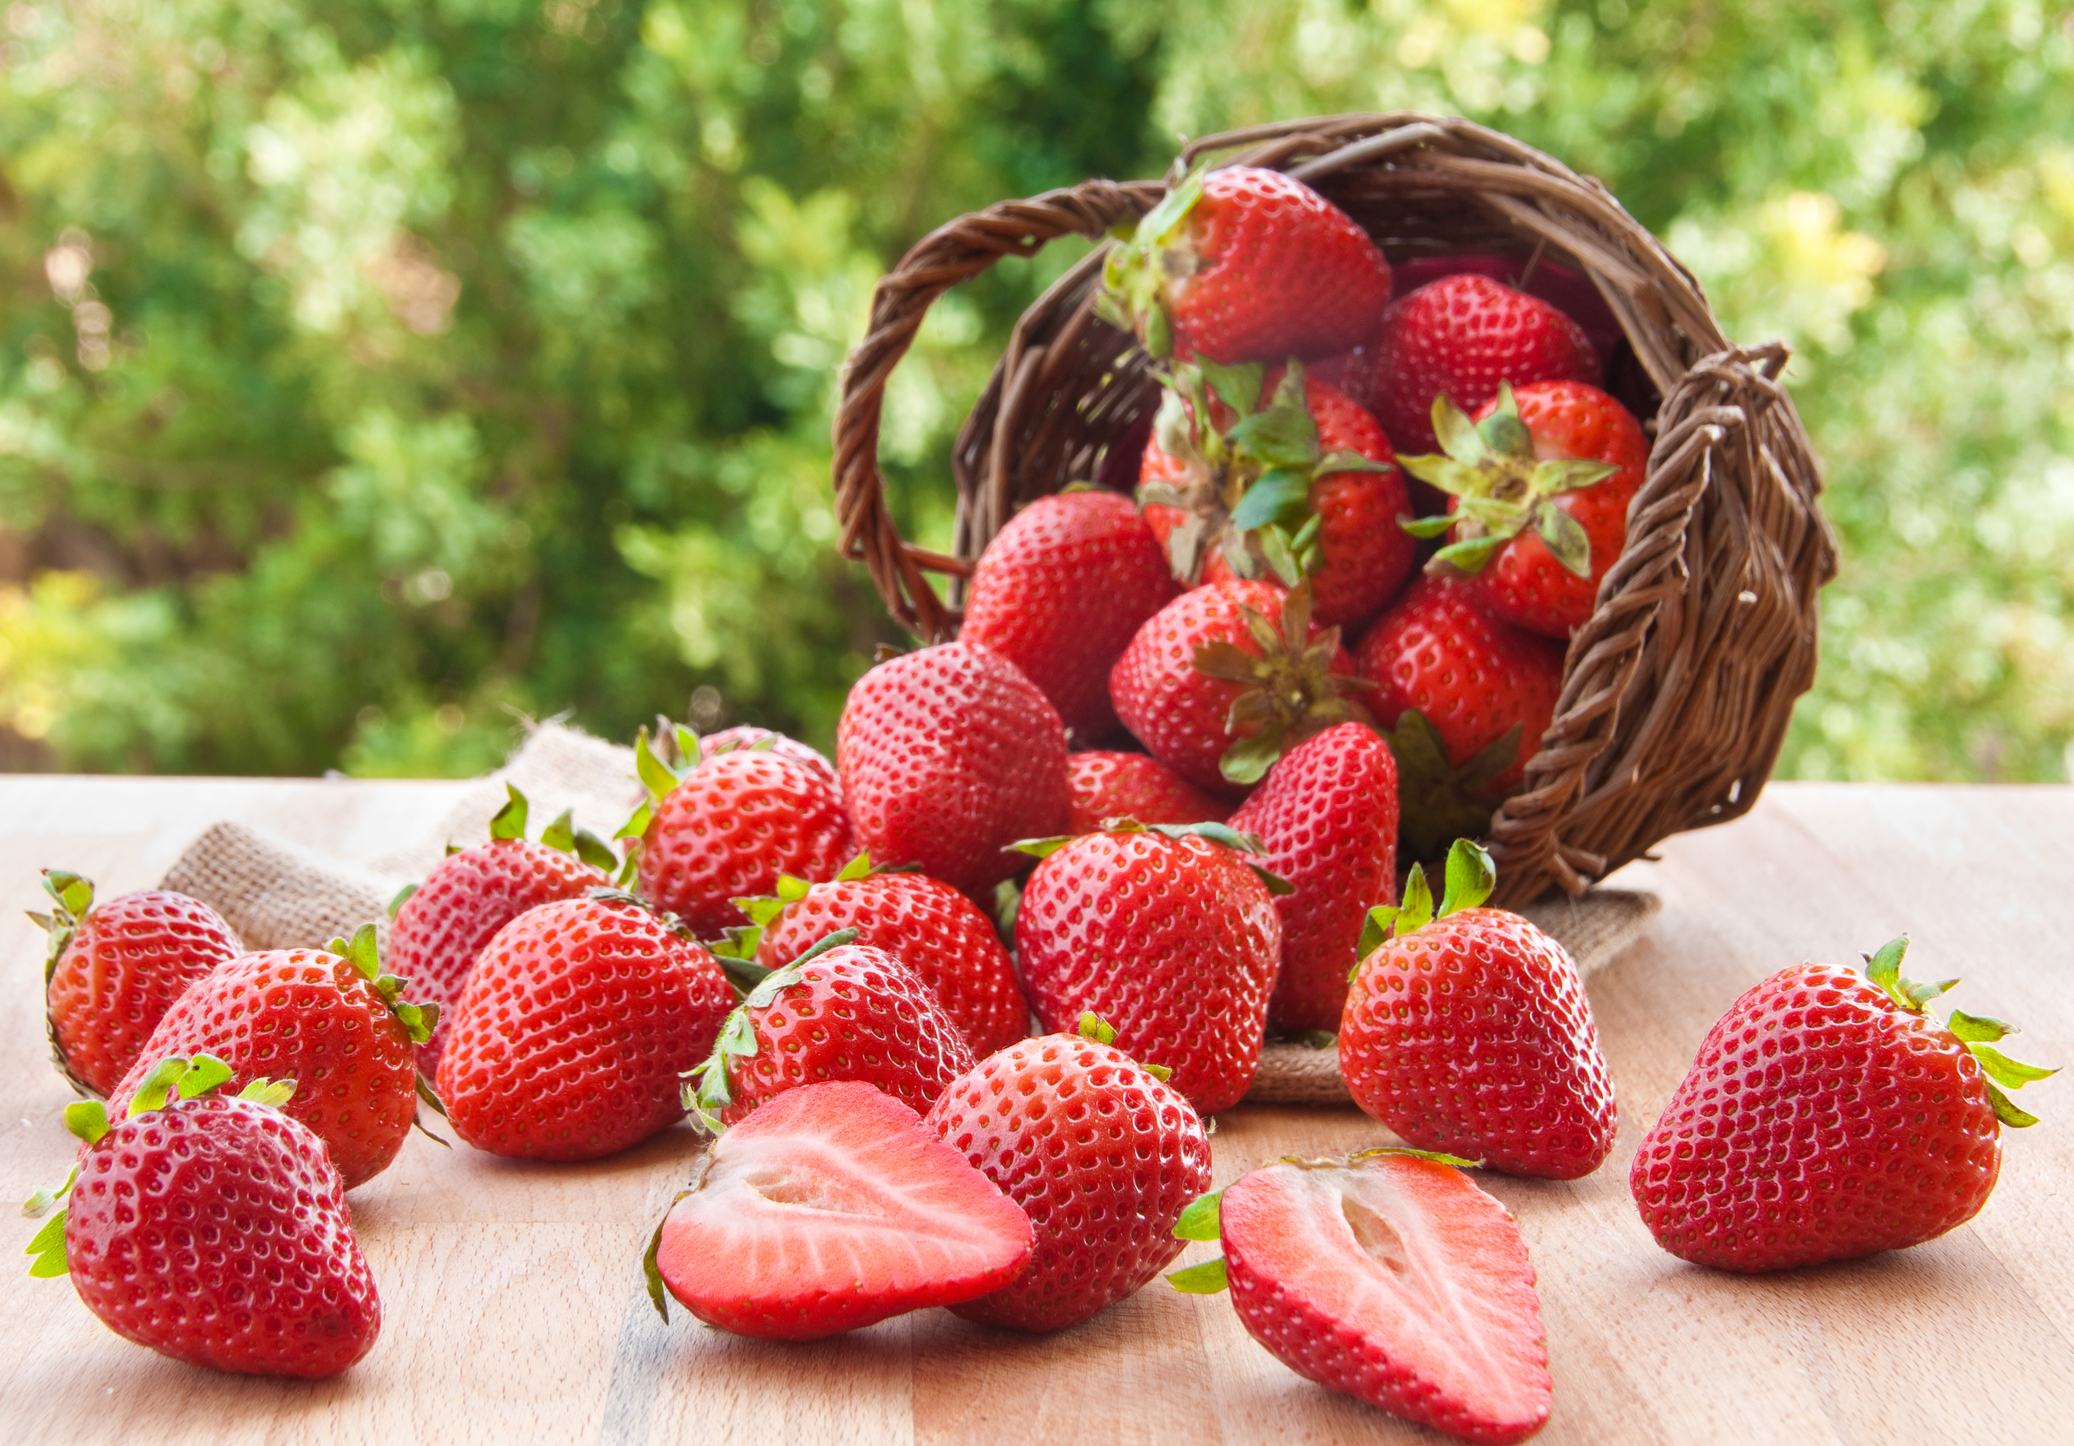 Fresh strawberries spilling from a basket onto a wooden surface, indicating agricultural produce business